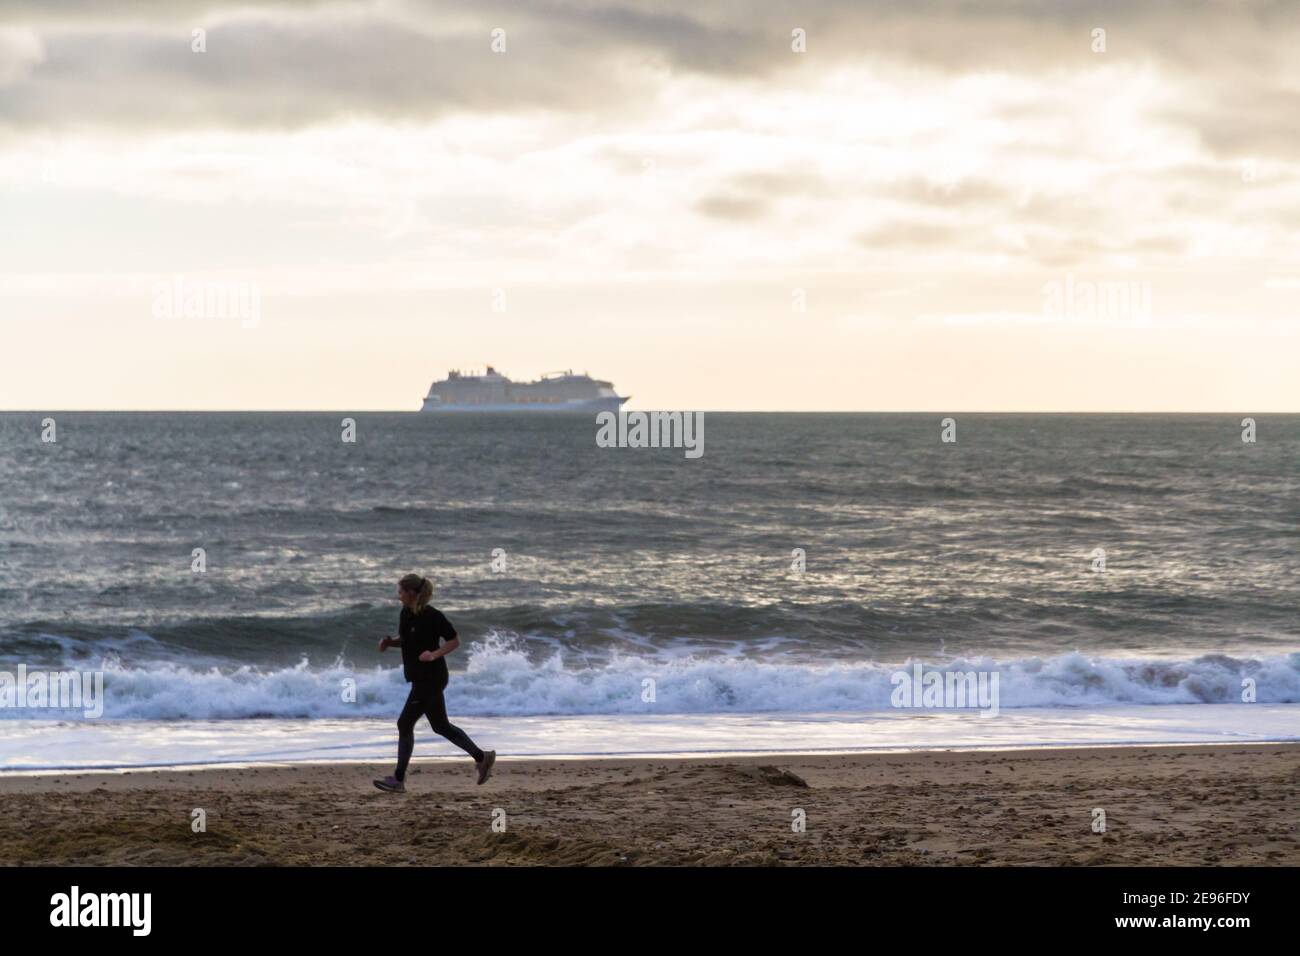 BOURNEMOUTH, ENGLAND - JANUARY 17 2021: Cruise ship moored off Bournemouth at Poole bay, jogger on beach, landscape Stock Photo